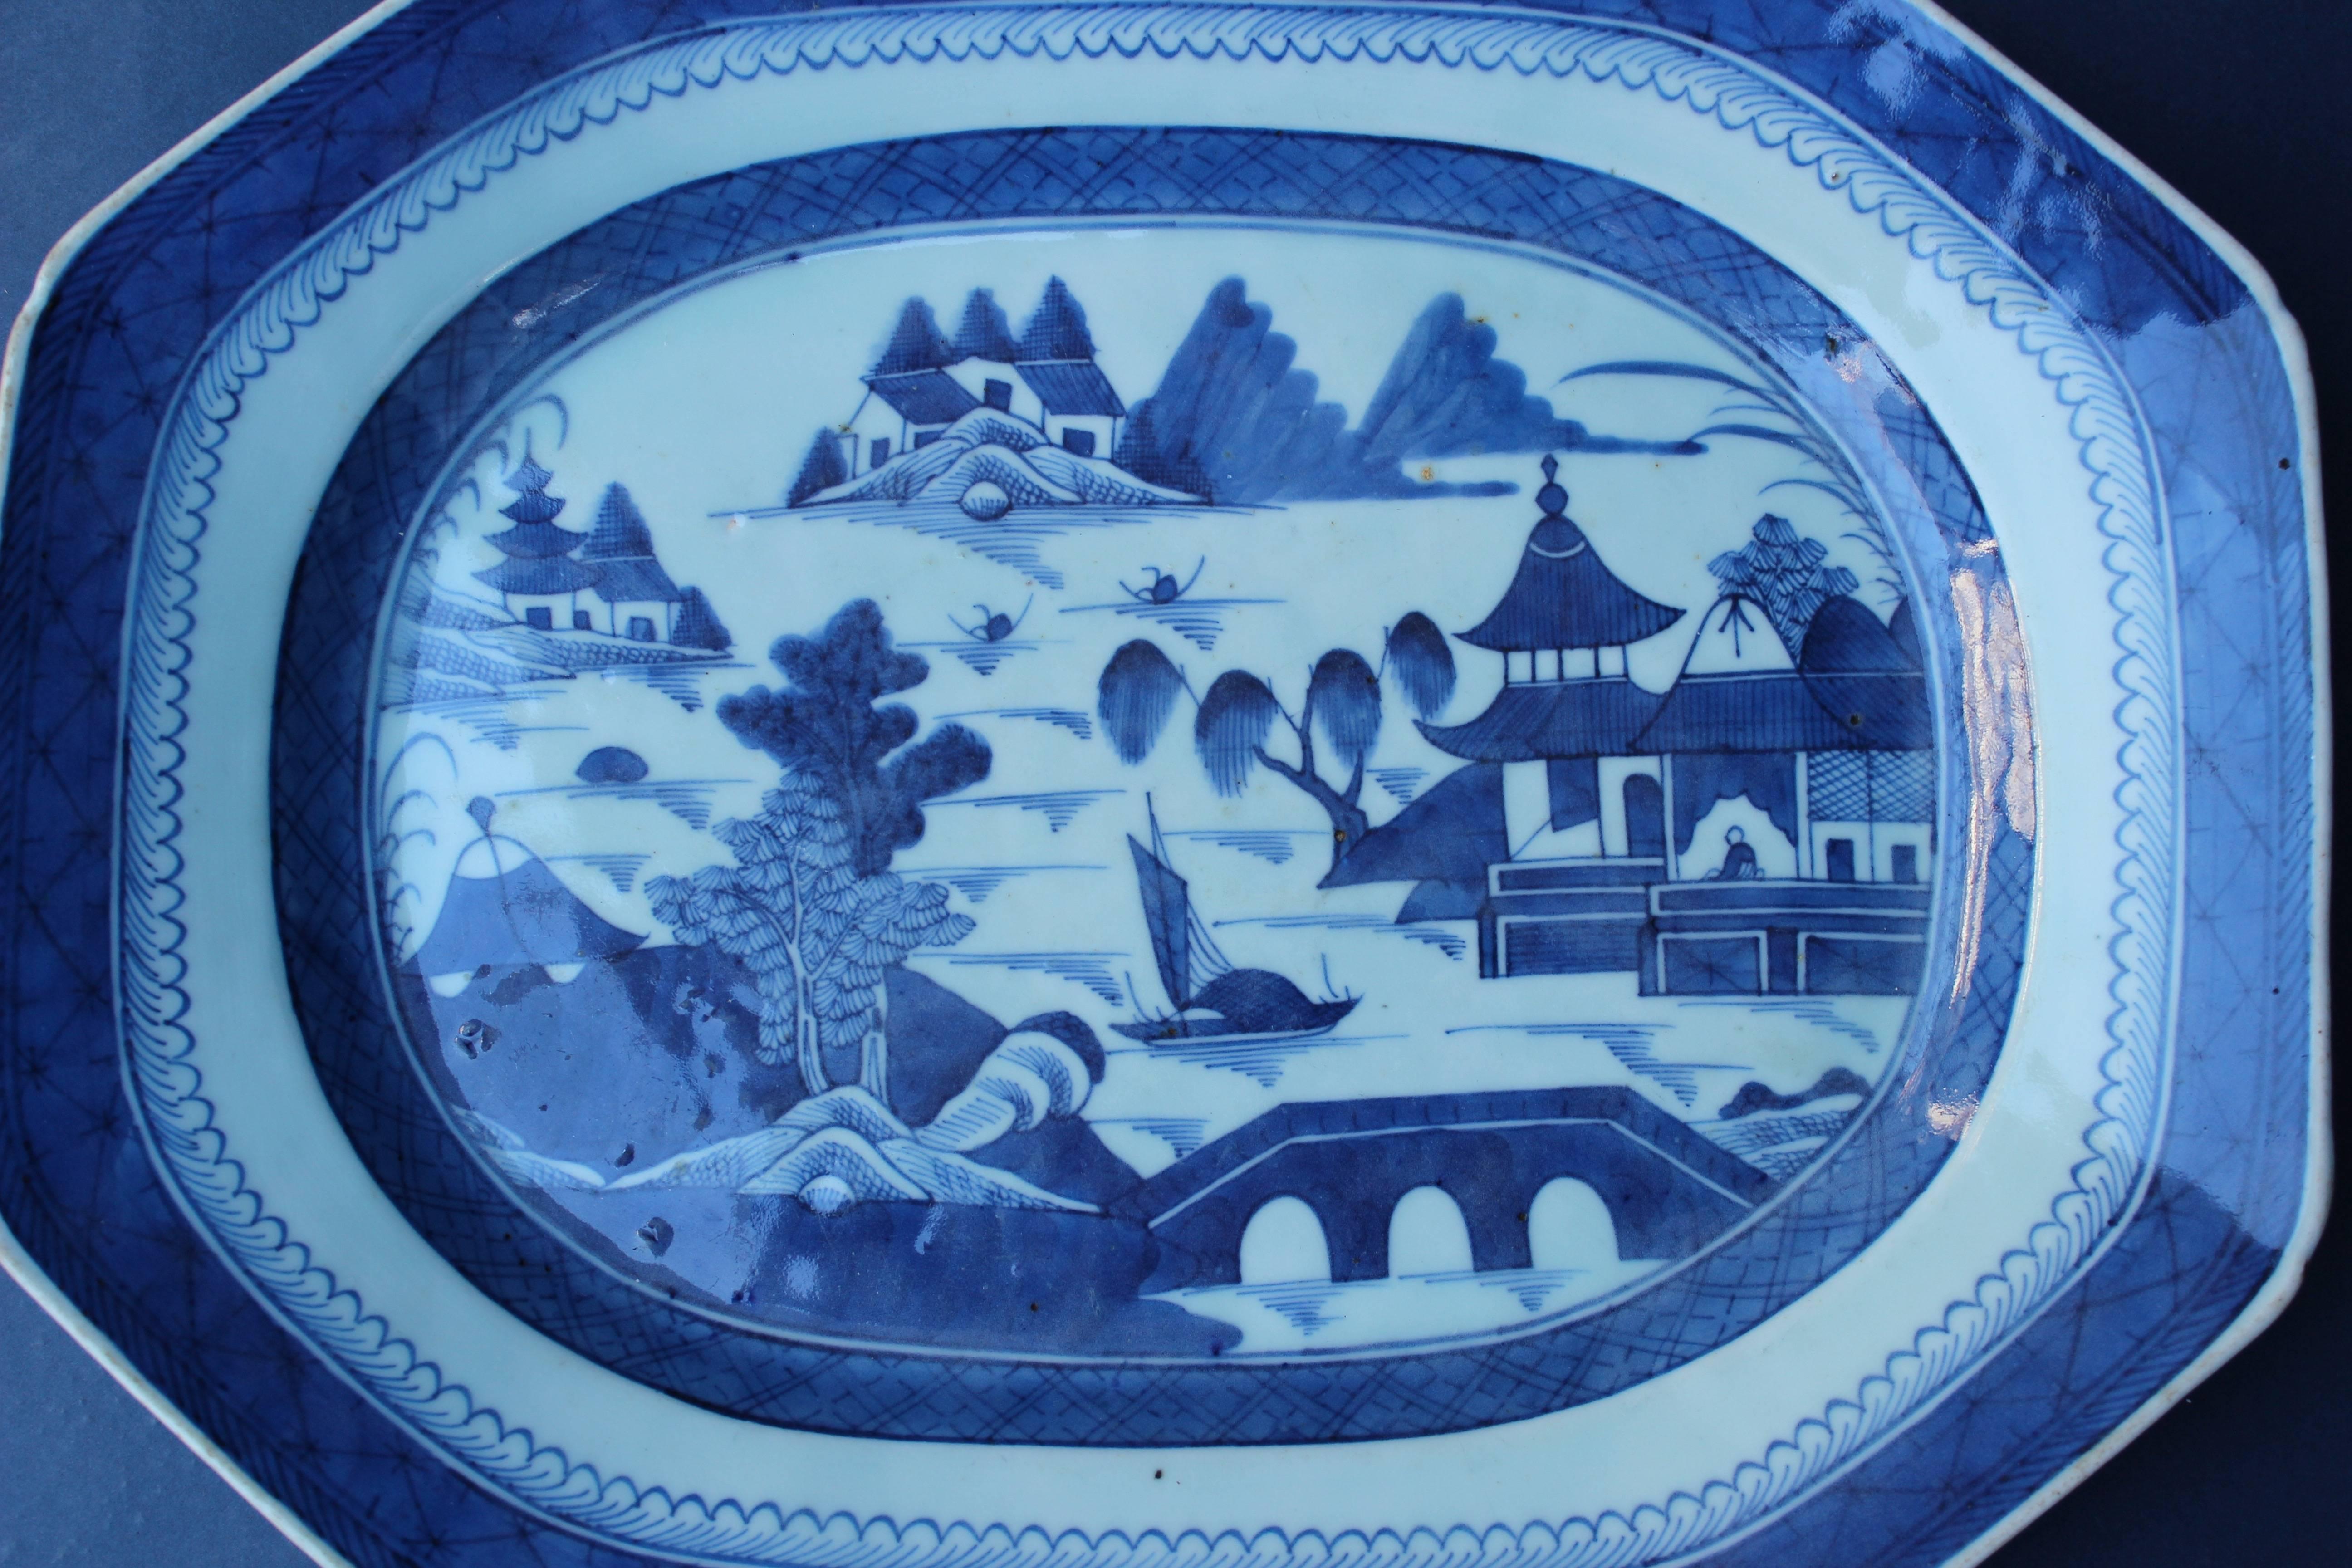 Chinese blue and white glazed ceramic hand-painted canton serving platter.